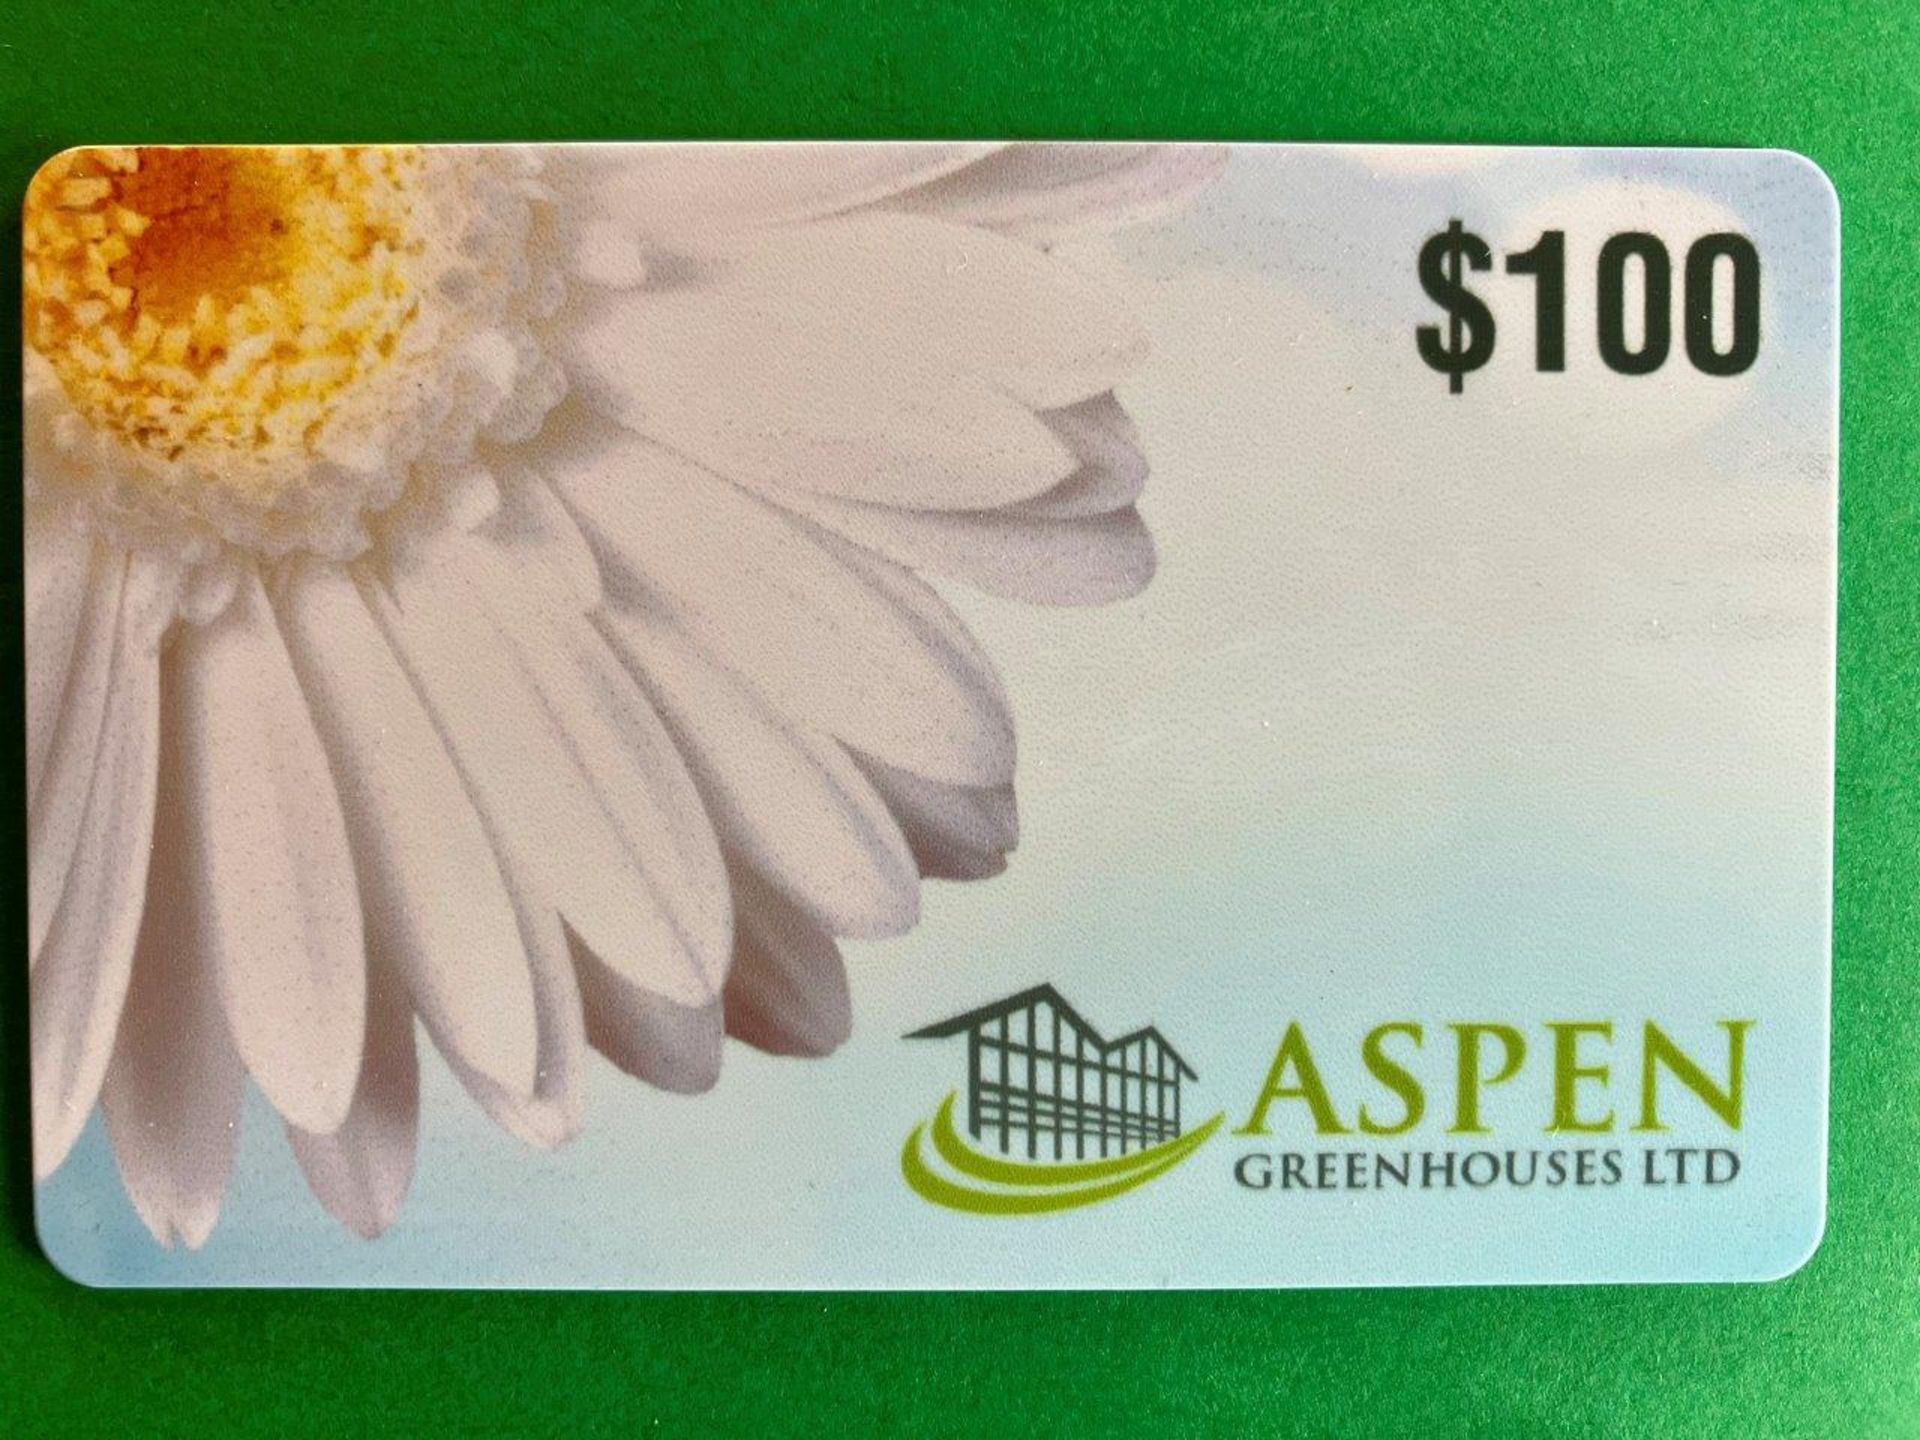 $100 ASPEN GREENHOUSES GIFT CARD - Image 2 of 2